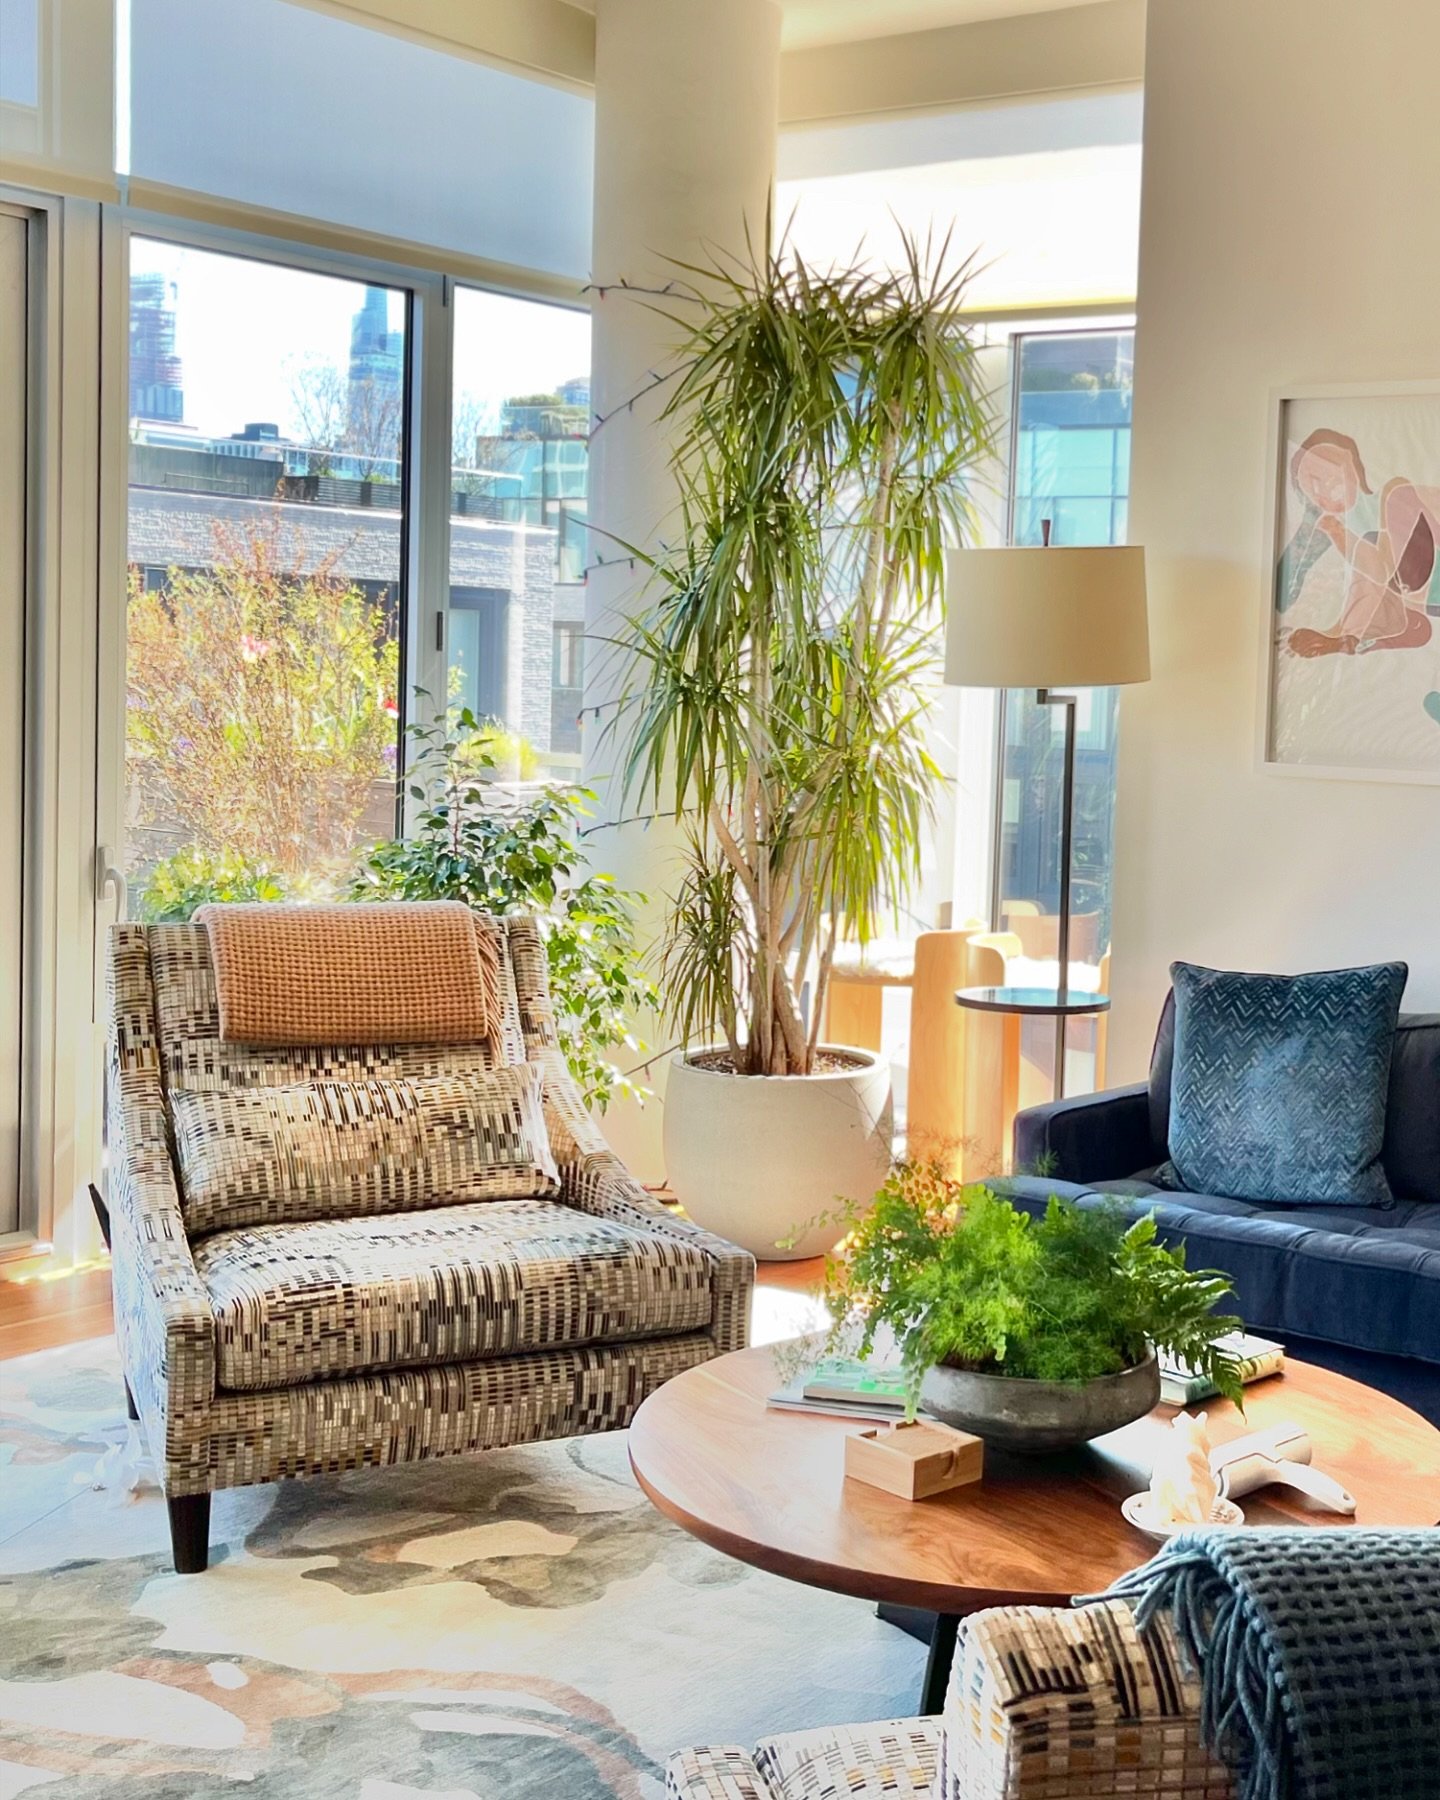 This striking Dracaena Marginata Character tree steals the show in our client&rsquo;s Chelsea apartment. Thanks to the floor-to-ceiling north and east windows, it basks in perfect lighting conditions&mdash;bright yet gentle✨🌿Additional touches like 